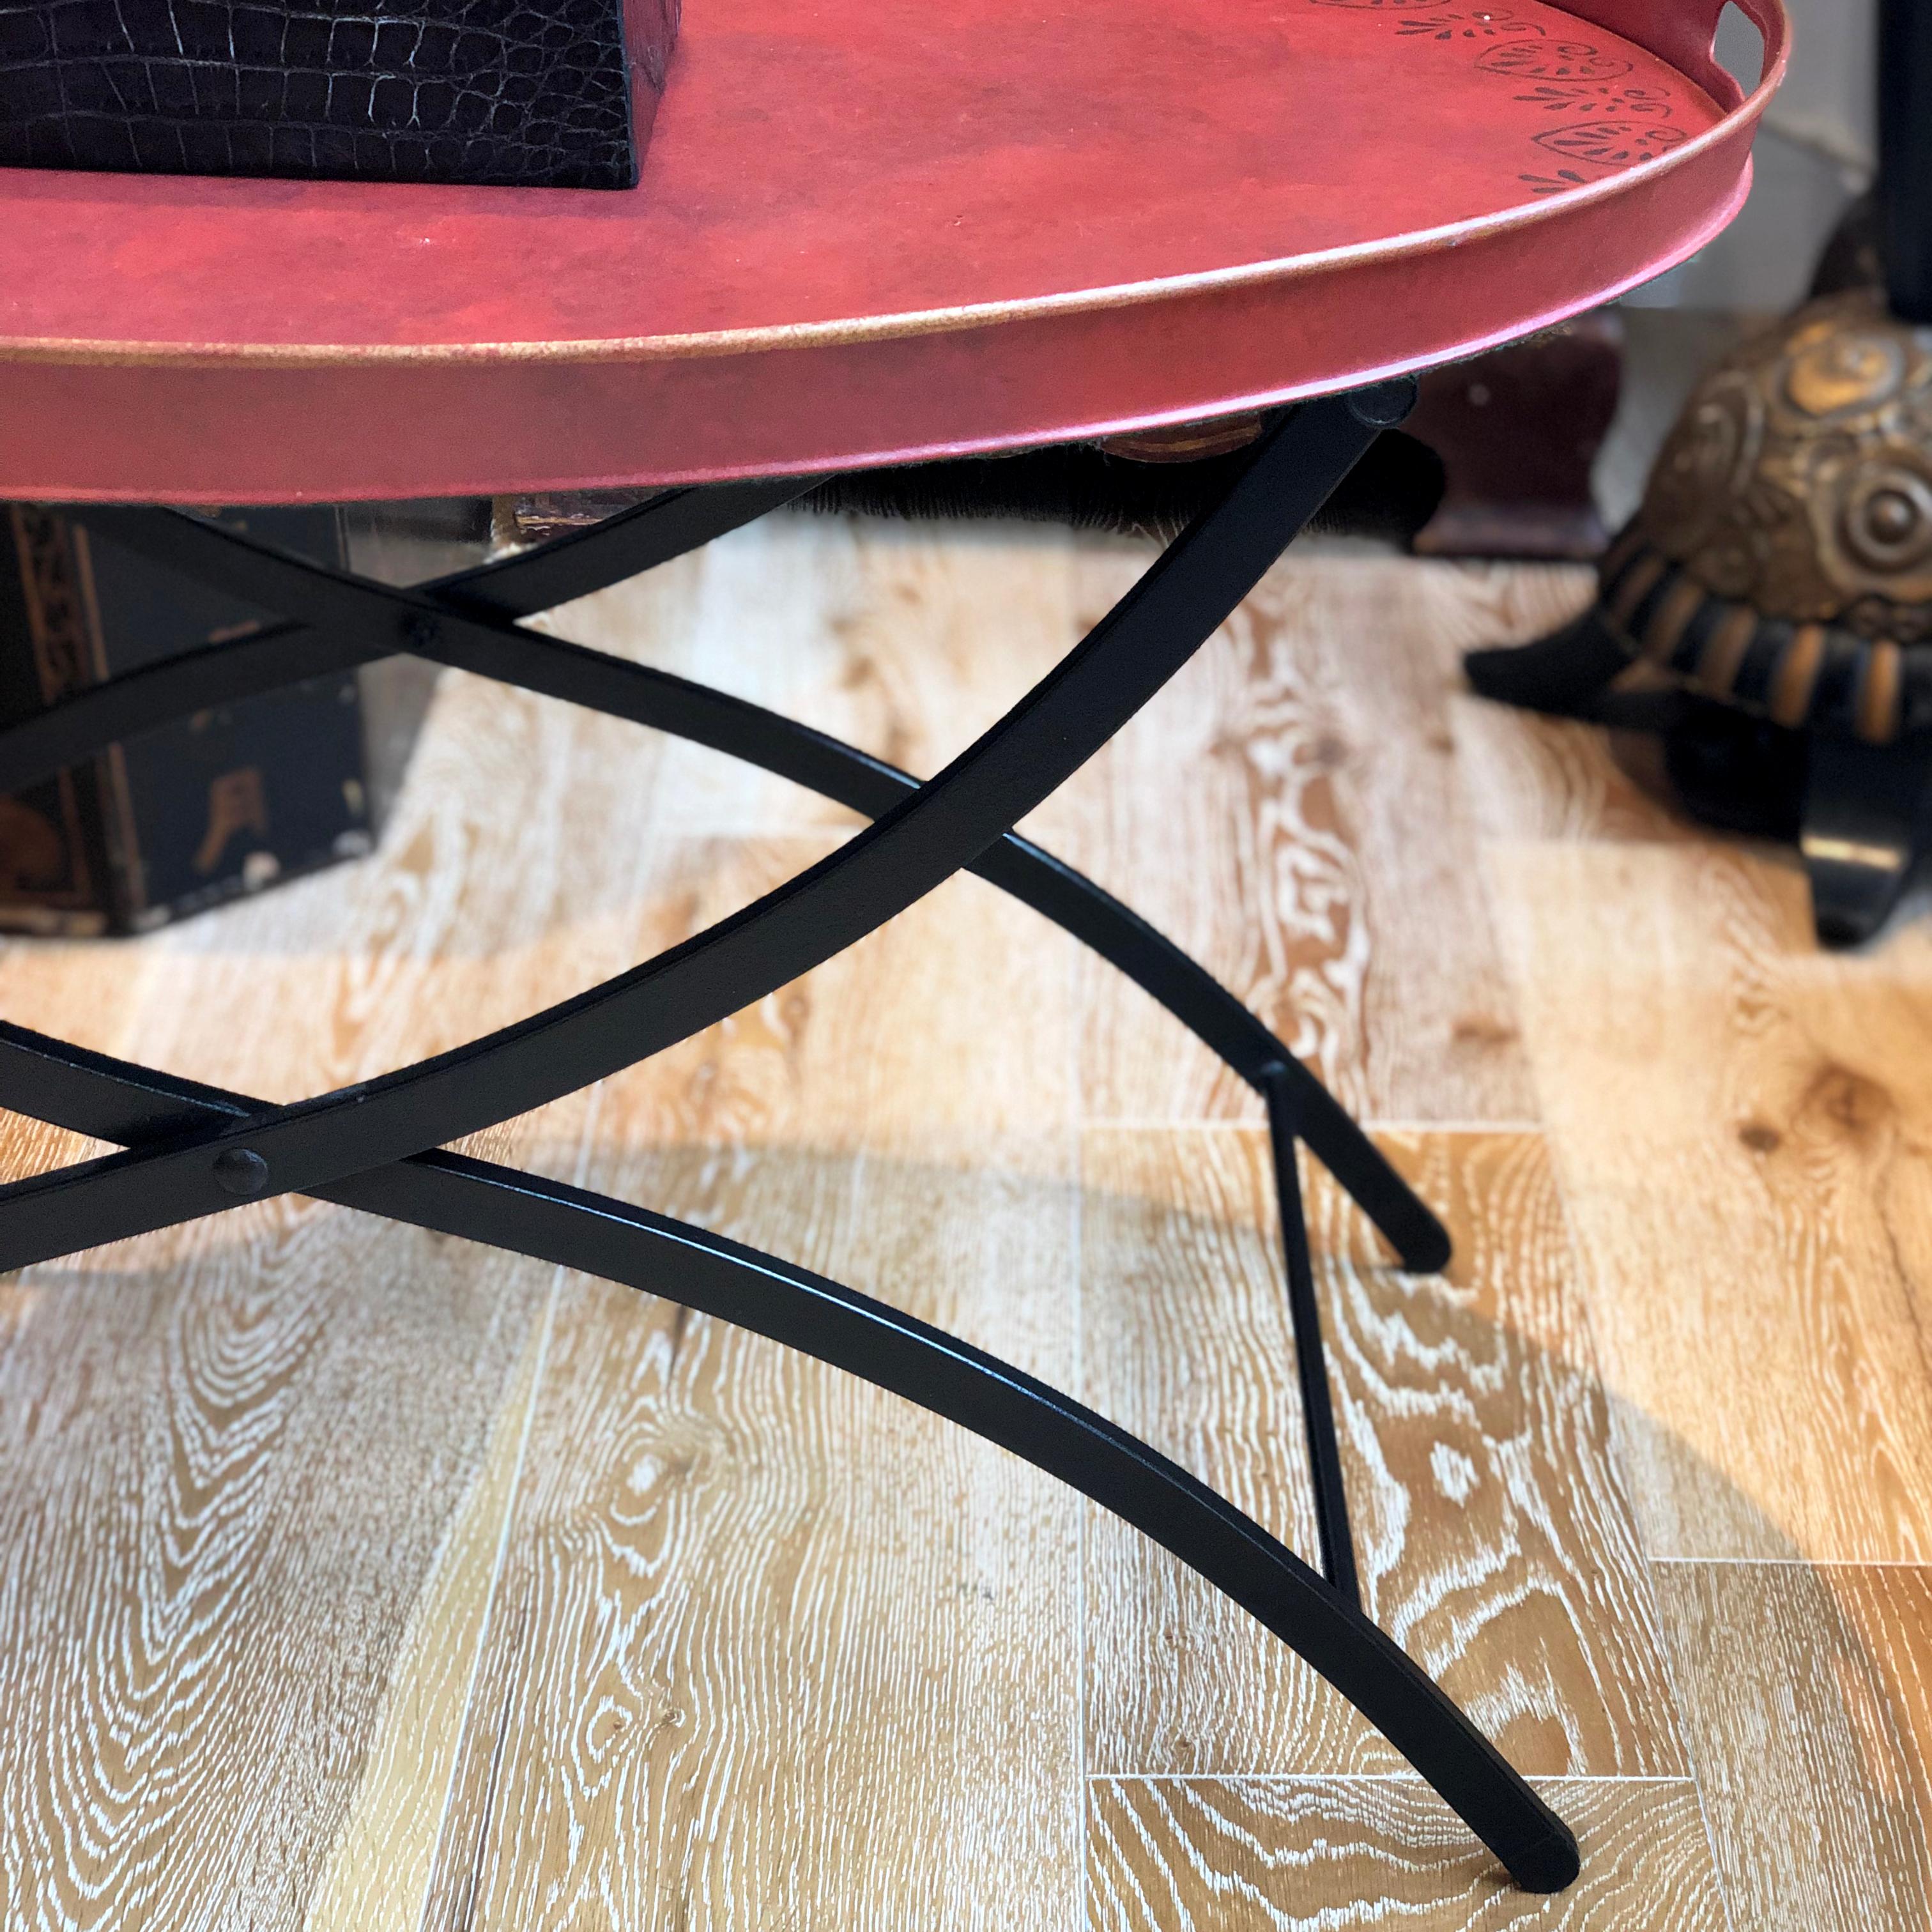 Red metal tray table with black foldable stand. Unique oval side table with a decorative black stencil edge.

Measures: 81 W x 64 D x 52 H cm

Good vintage condition considering the age.